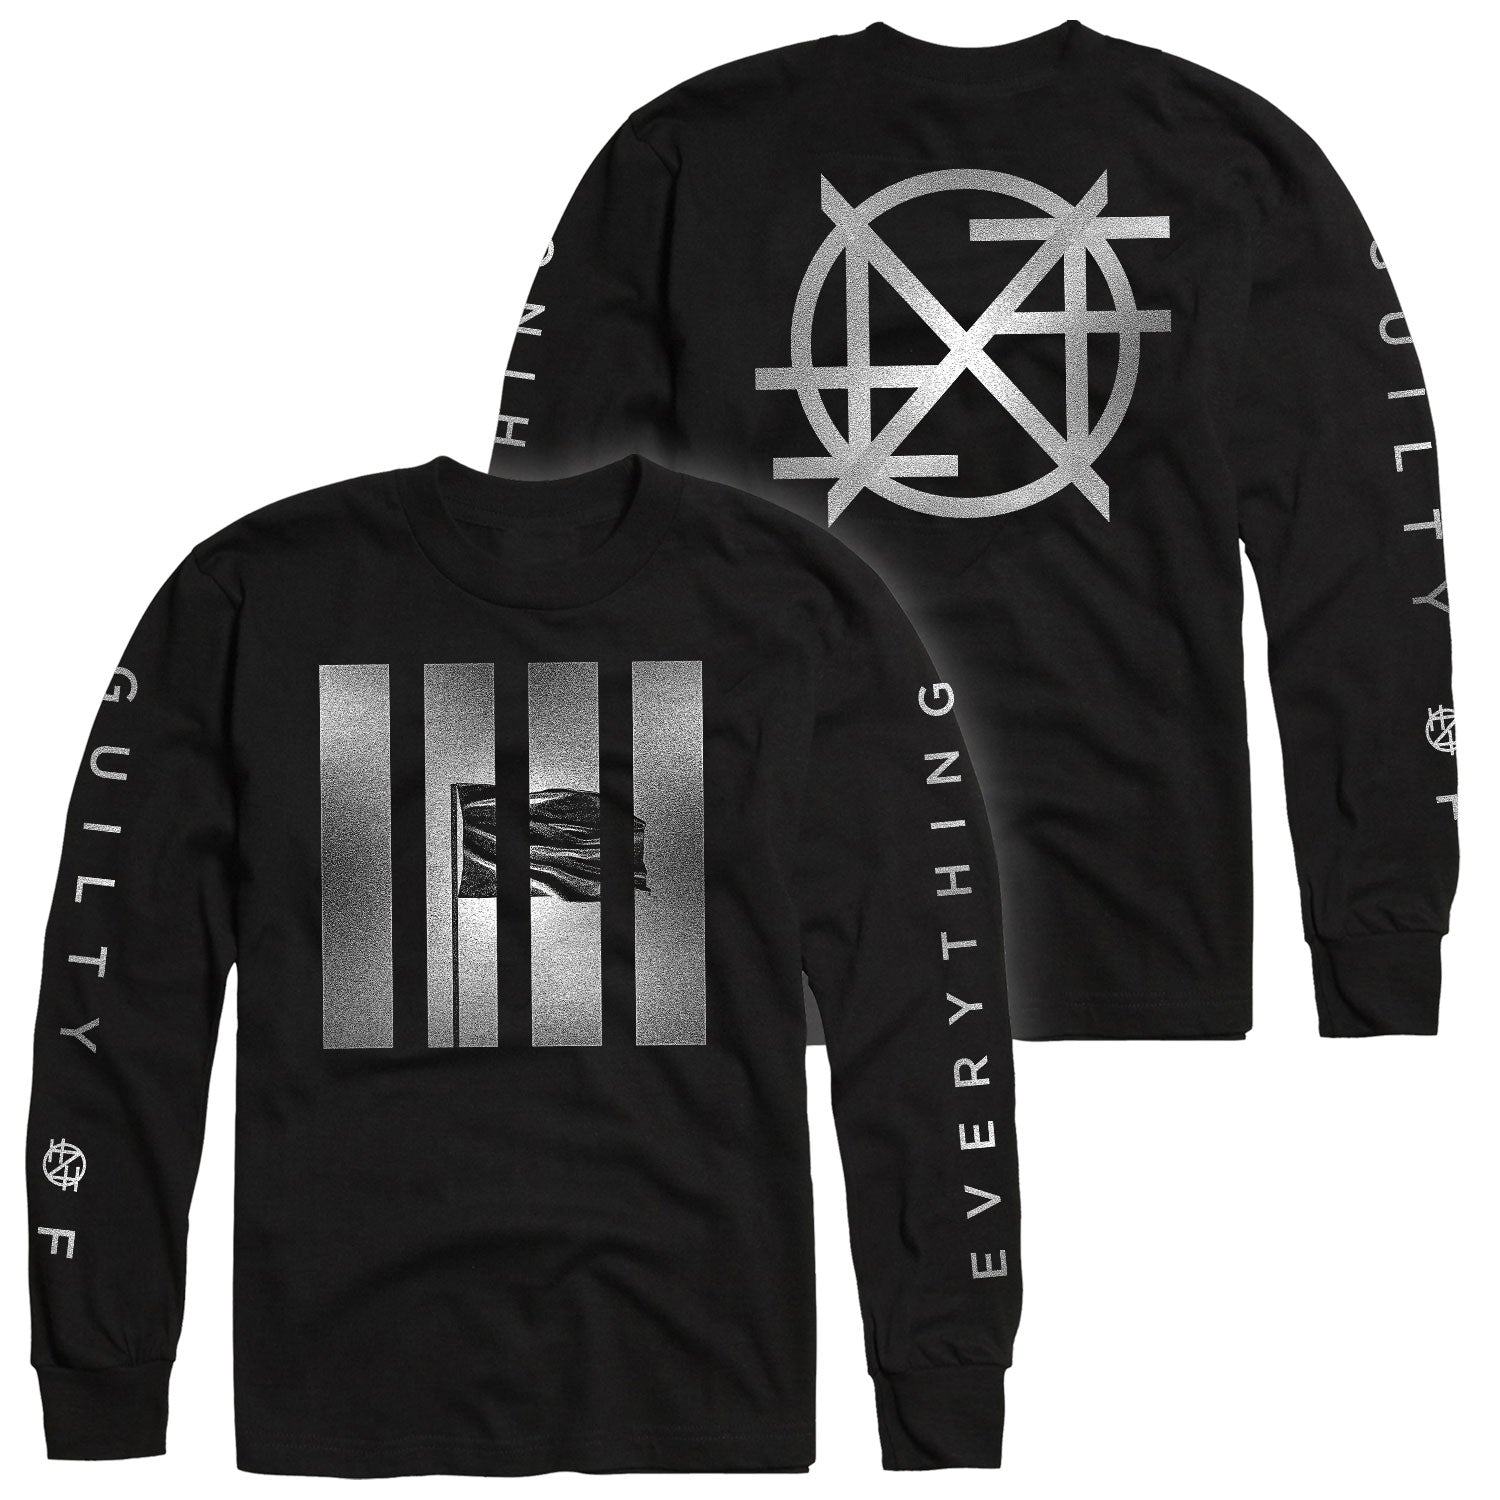 Nothing "Guilty Of Everything (10 Year Anniversary)" Longsleeve